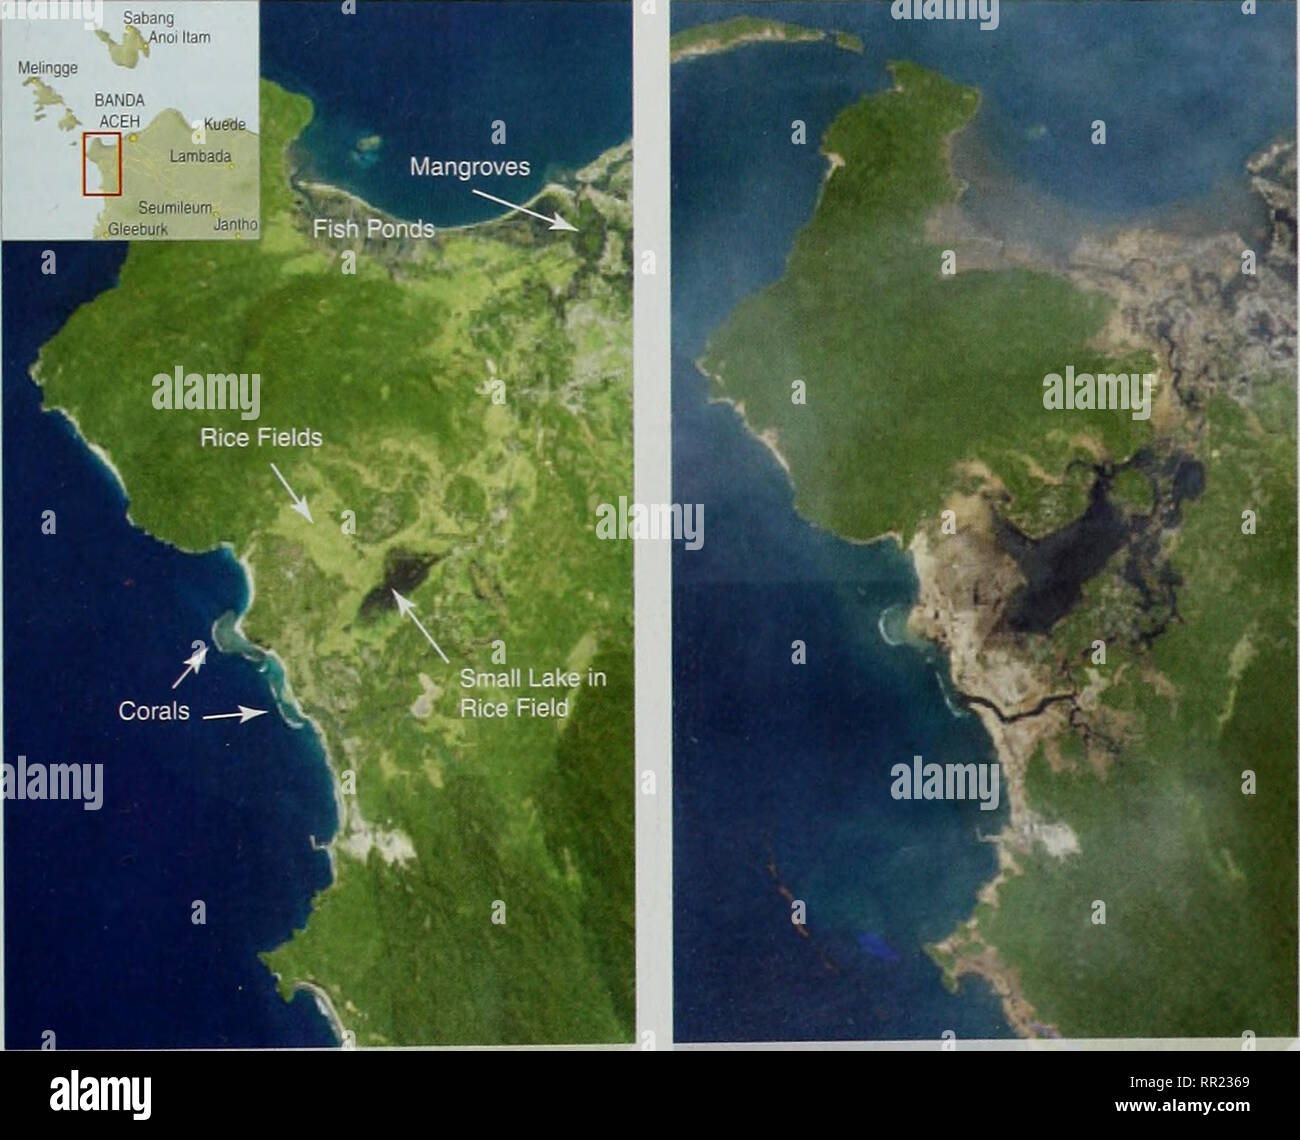 After the Tsunami: Rapid Environmental Assessment. Case study: Overall  damage to ecosystems in Sumatra These images show a combination of a rocky,  hilly headland along with a small river delta and